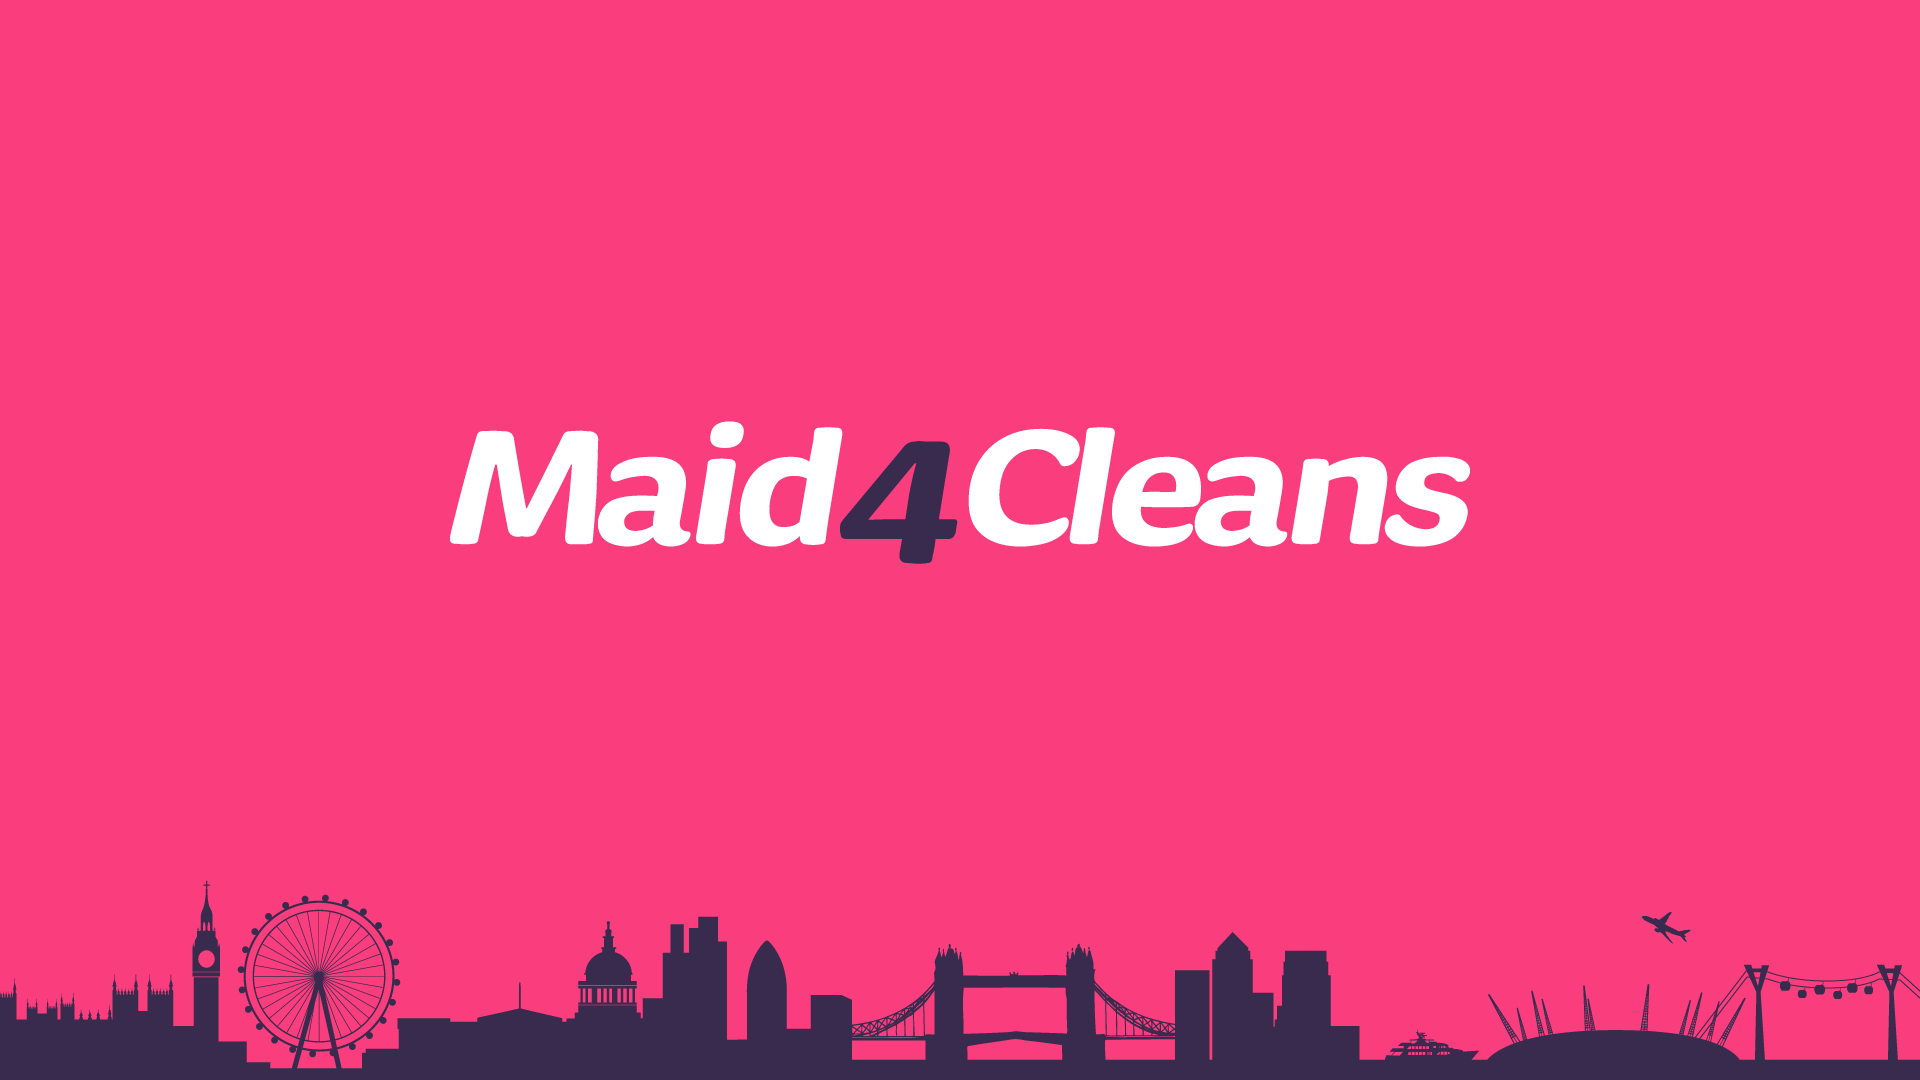 Cleaning company branding and website design